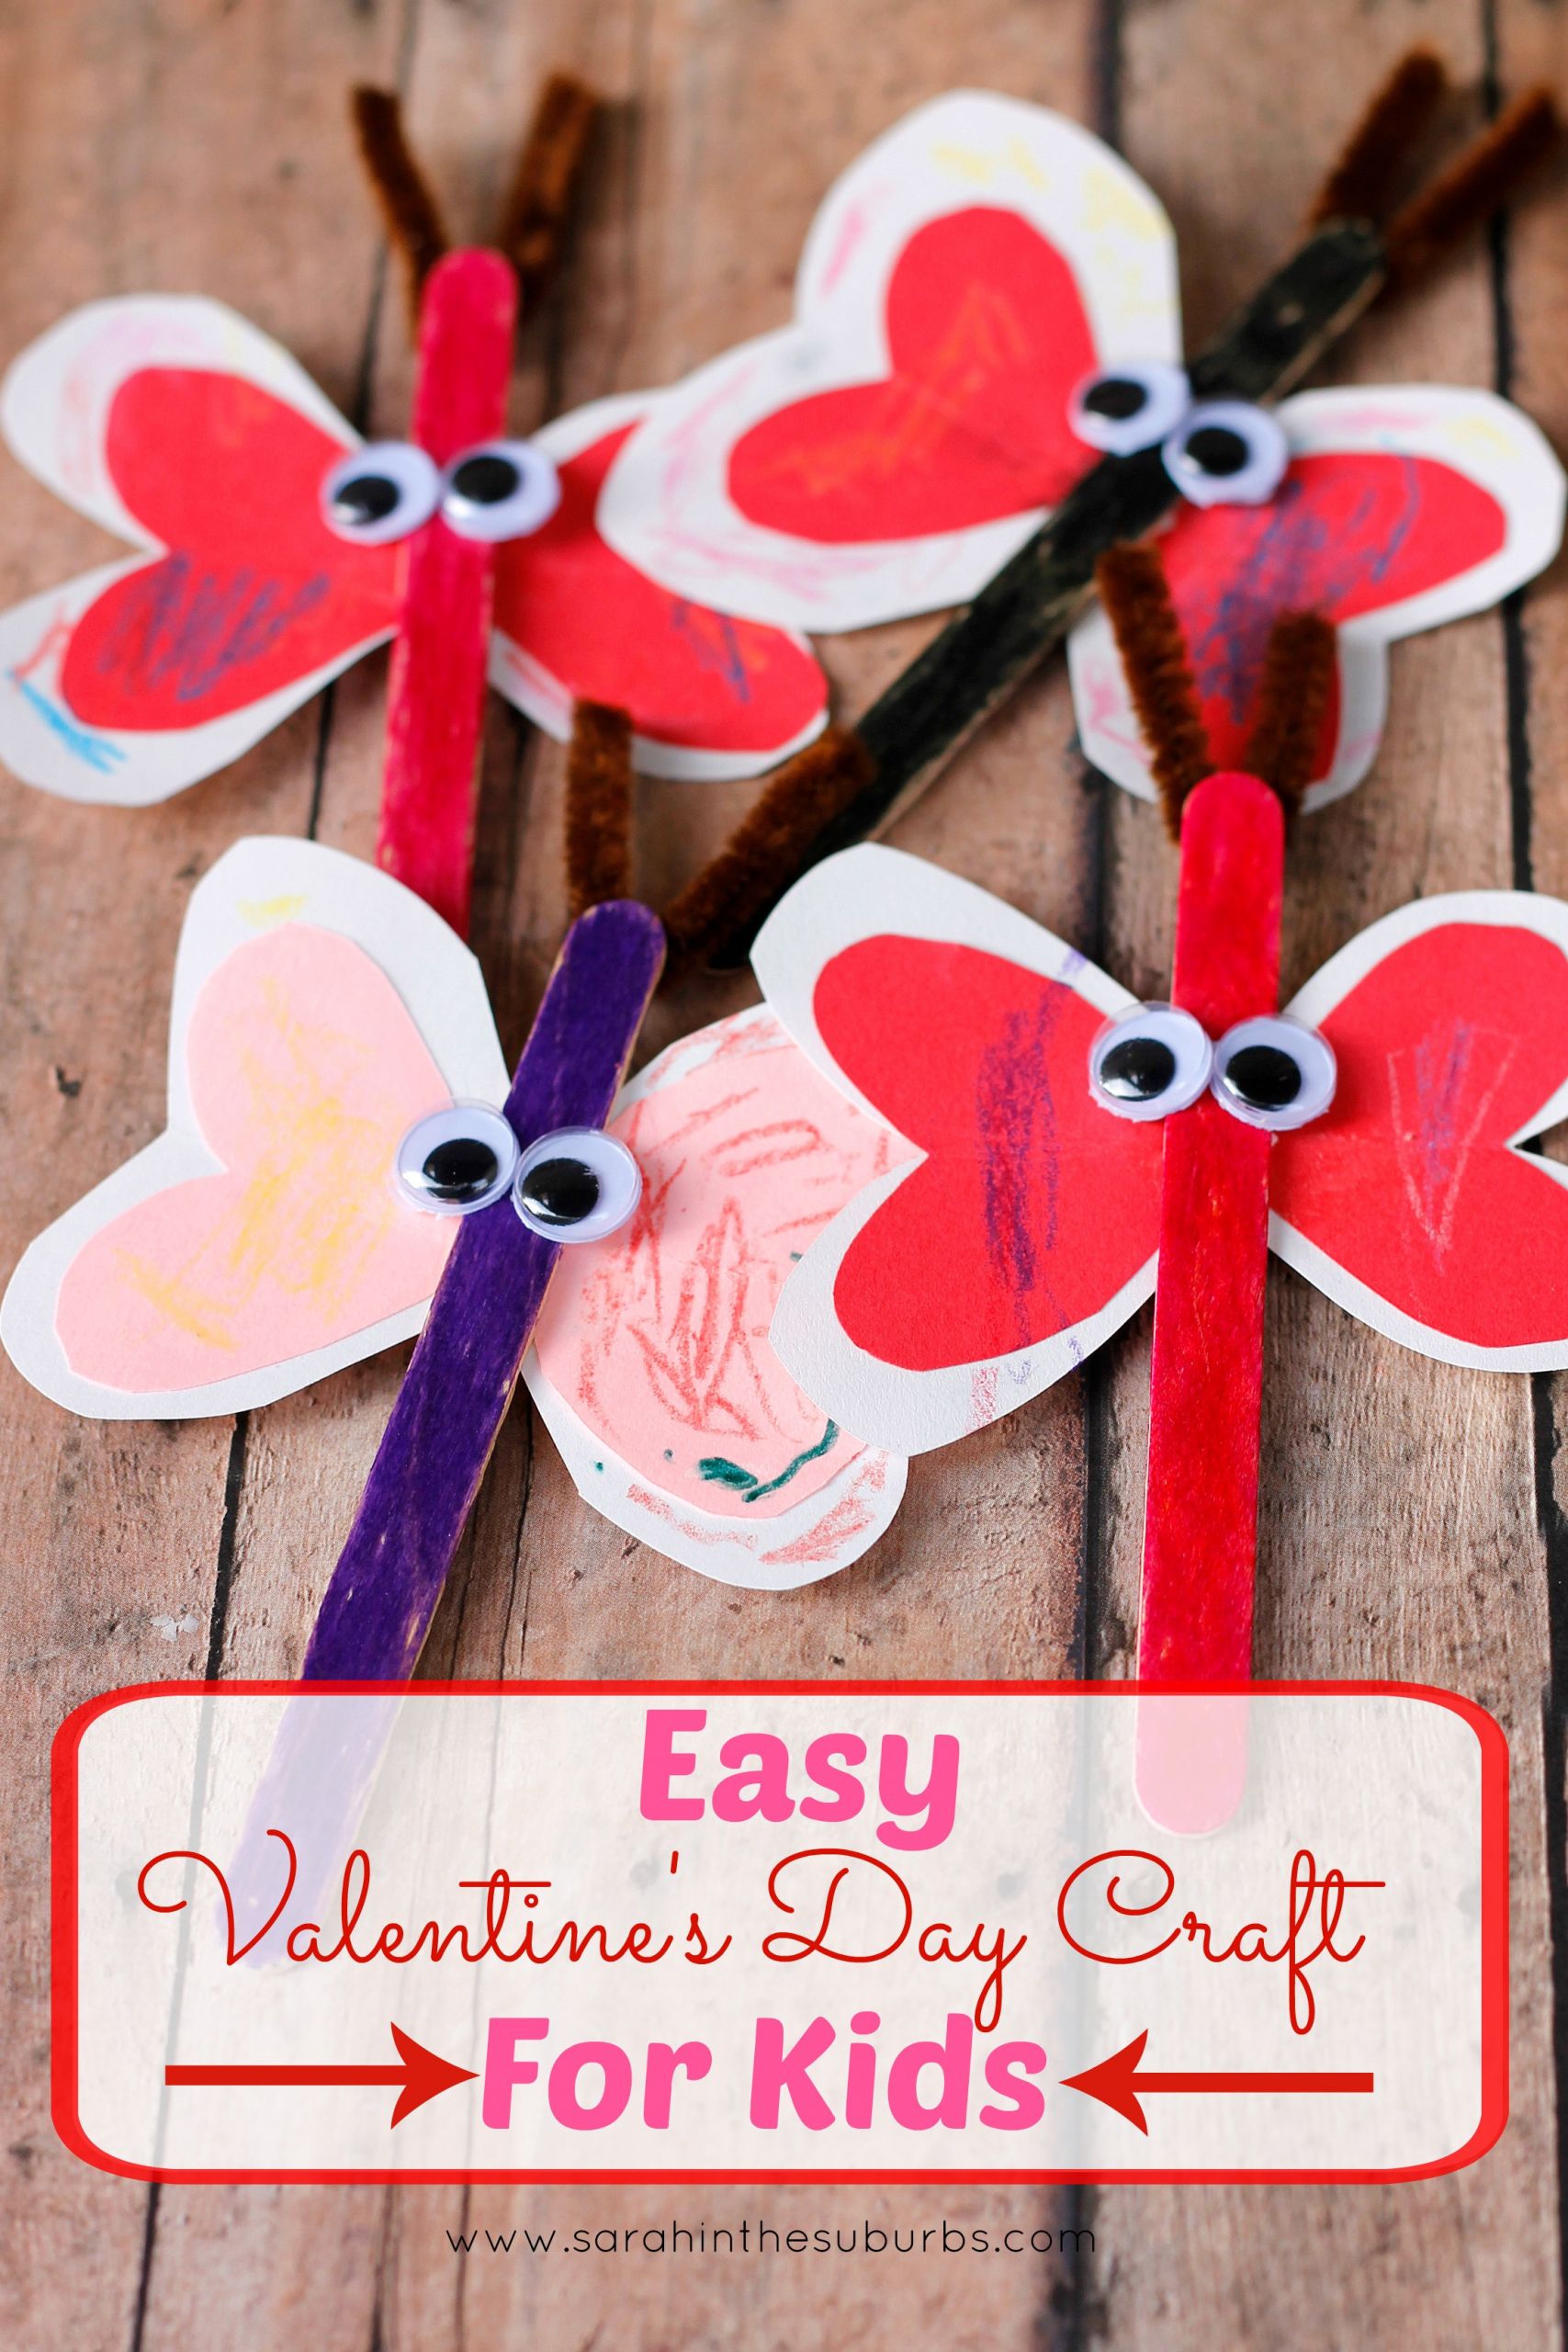 Valentines Day Kids Craft Ideas
 Love Bug Valentine s Day Craft for Kids Sarah in the Suburbs